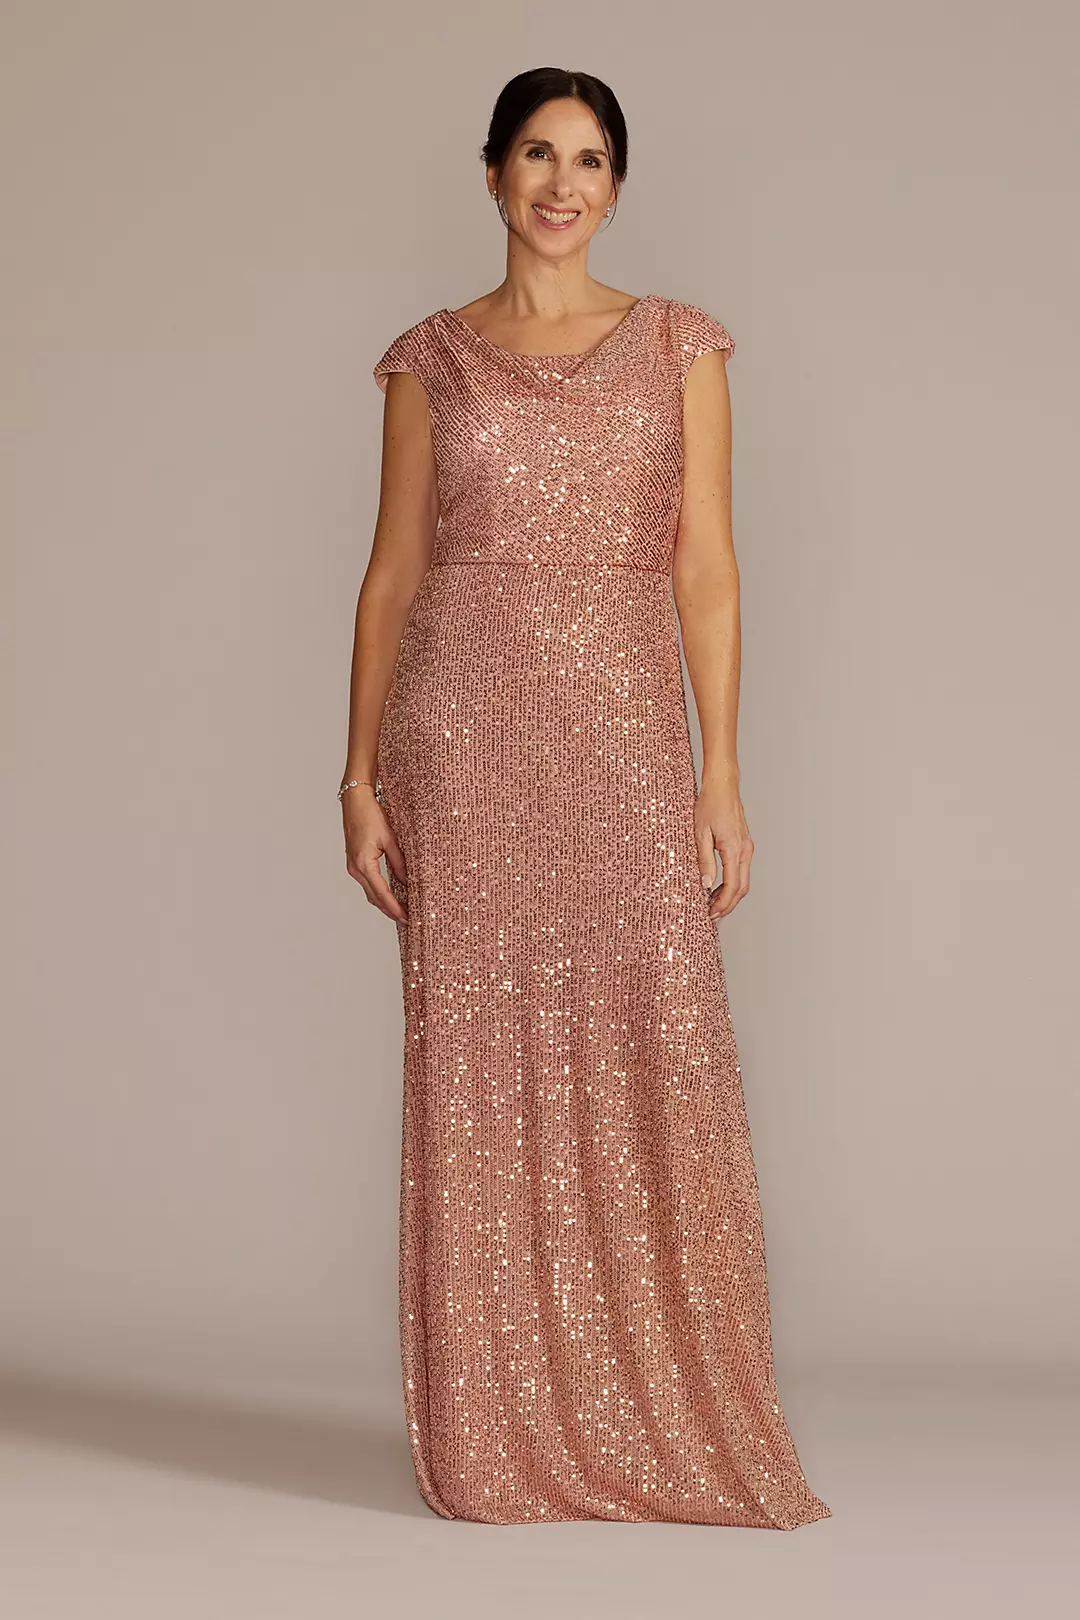 Cowl Neck Cap Sleeve Allover Sequin Gown Image